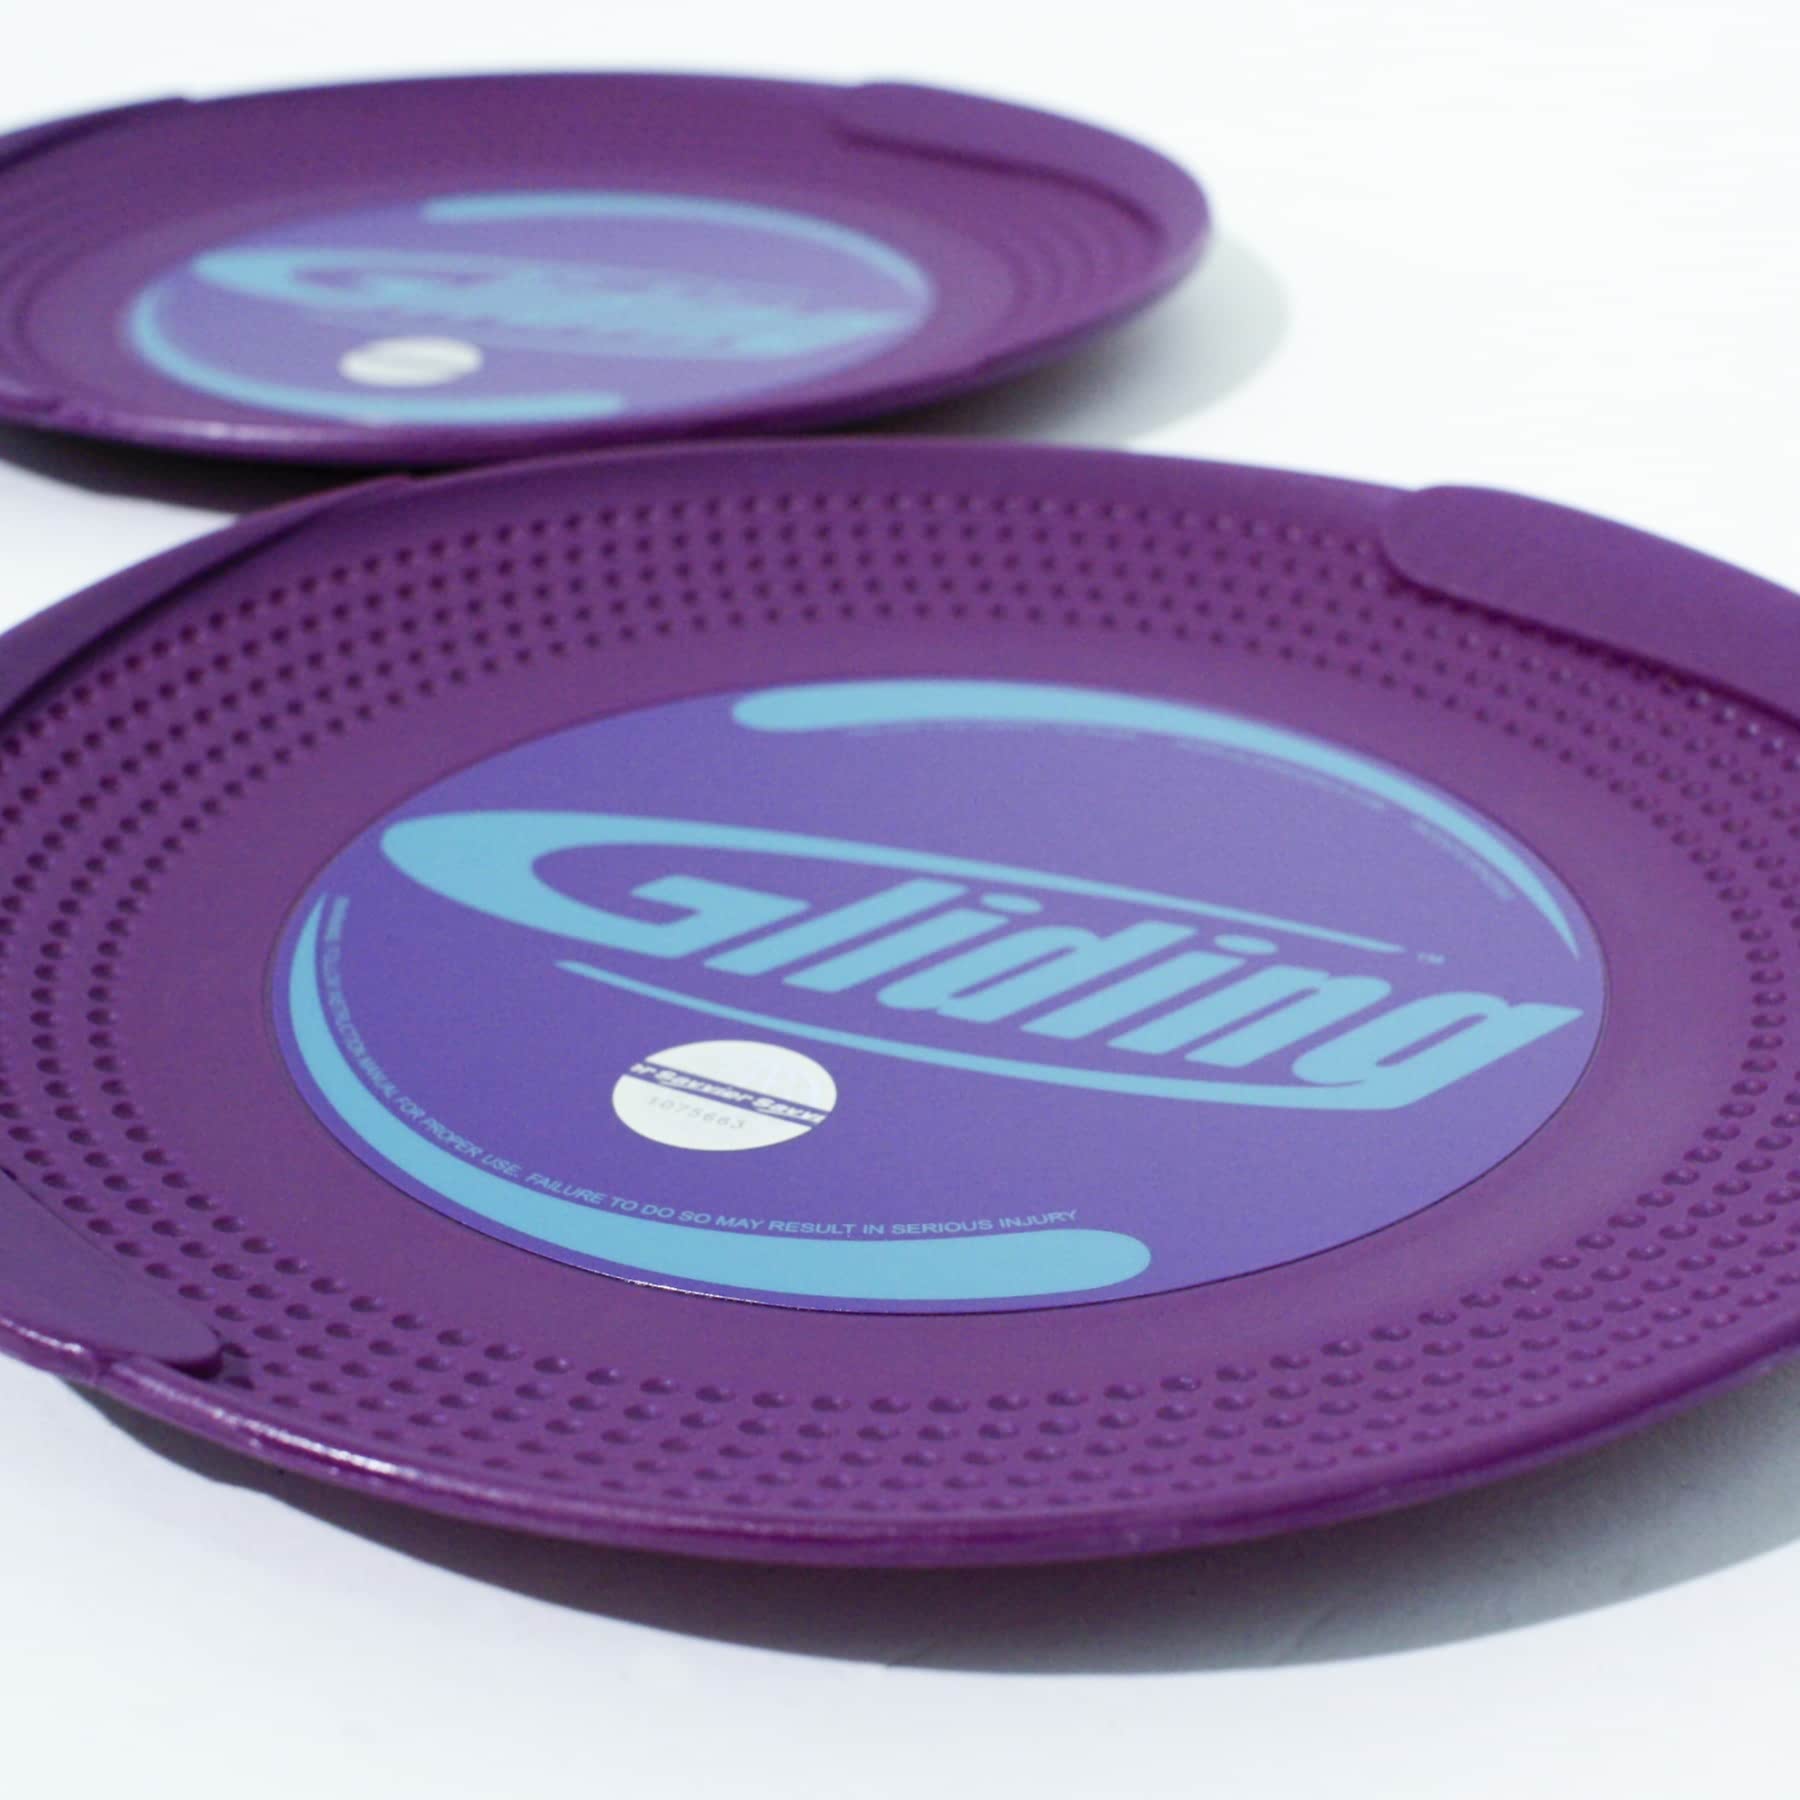 Gliding Discs - Available for Carpeted or Hardwood Floor – Serious